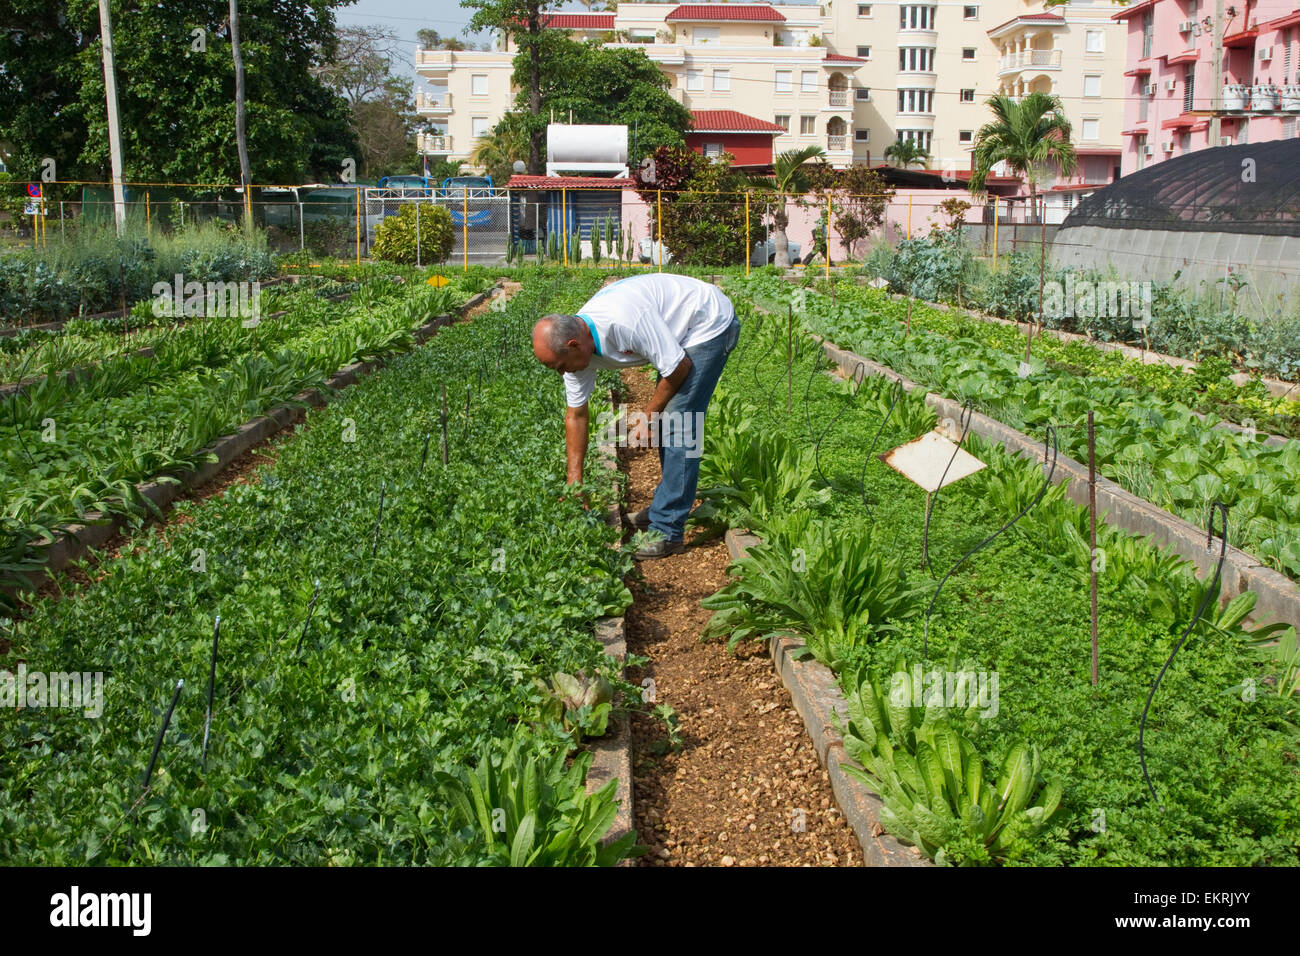 Community allotments known as 'organiponicos' in a suburb of Havana where people grow fruits and vegetables Stock Photo